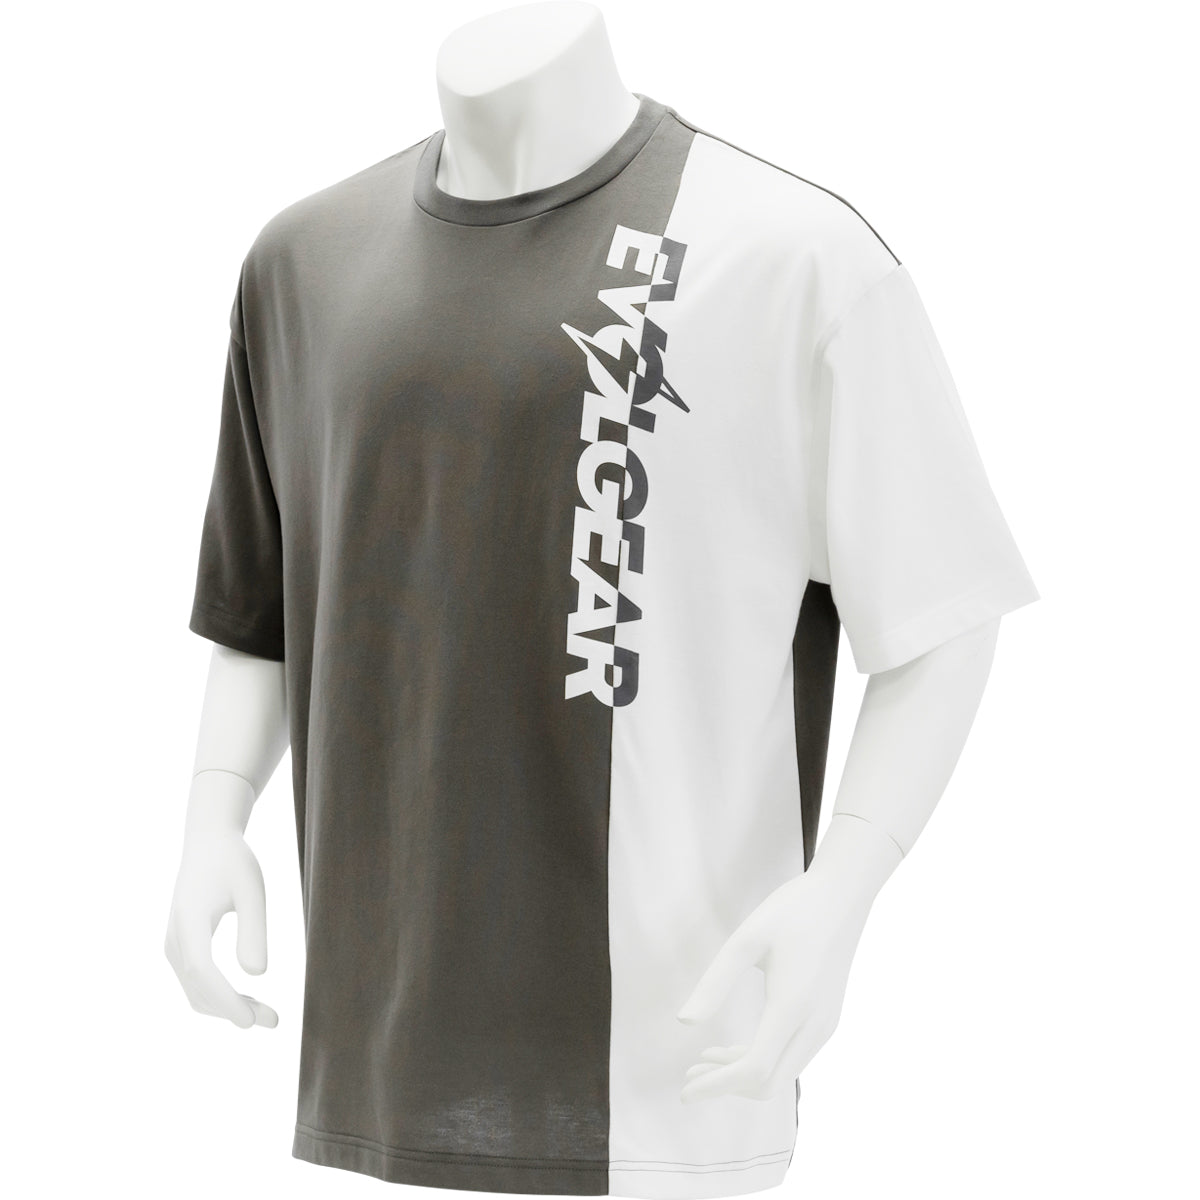 【NEW!】EVOLGEAR SWITCHED OVERSIZE T-SHIRTS【GREY】